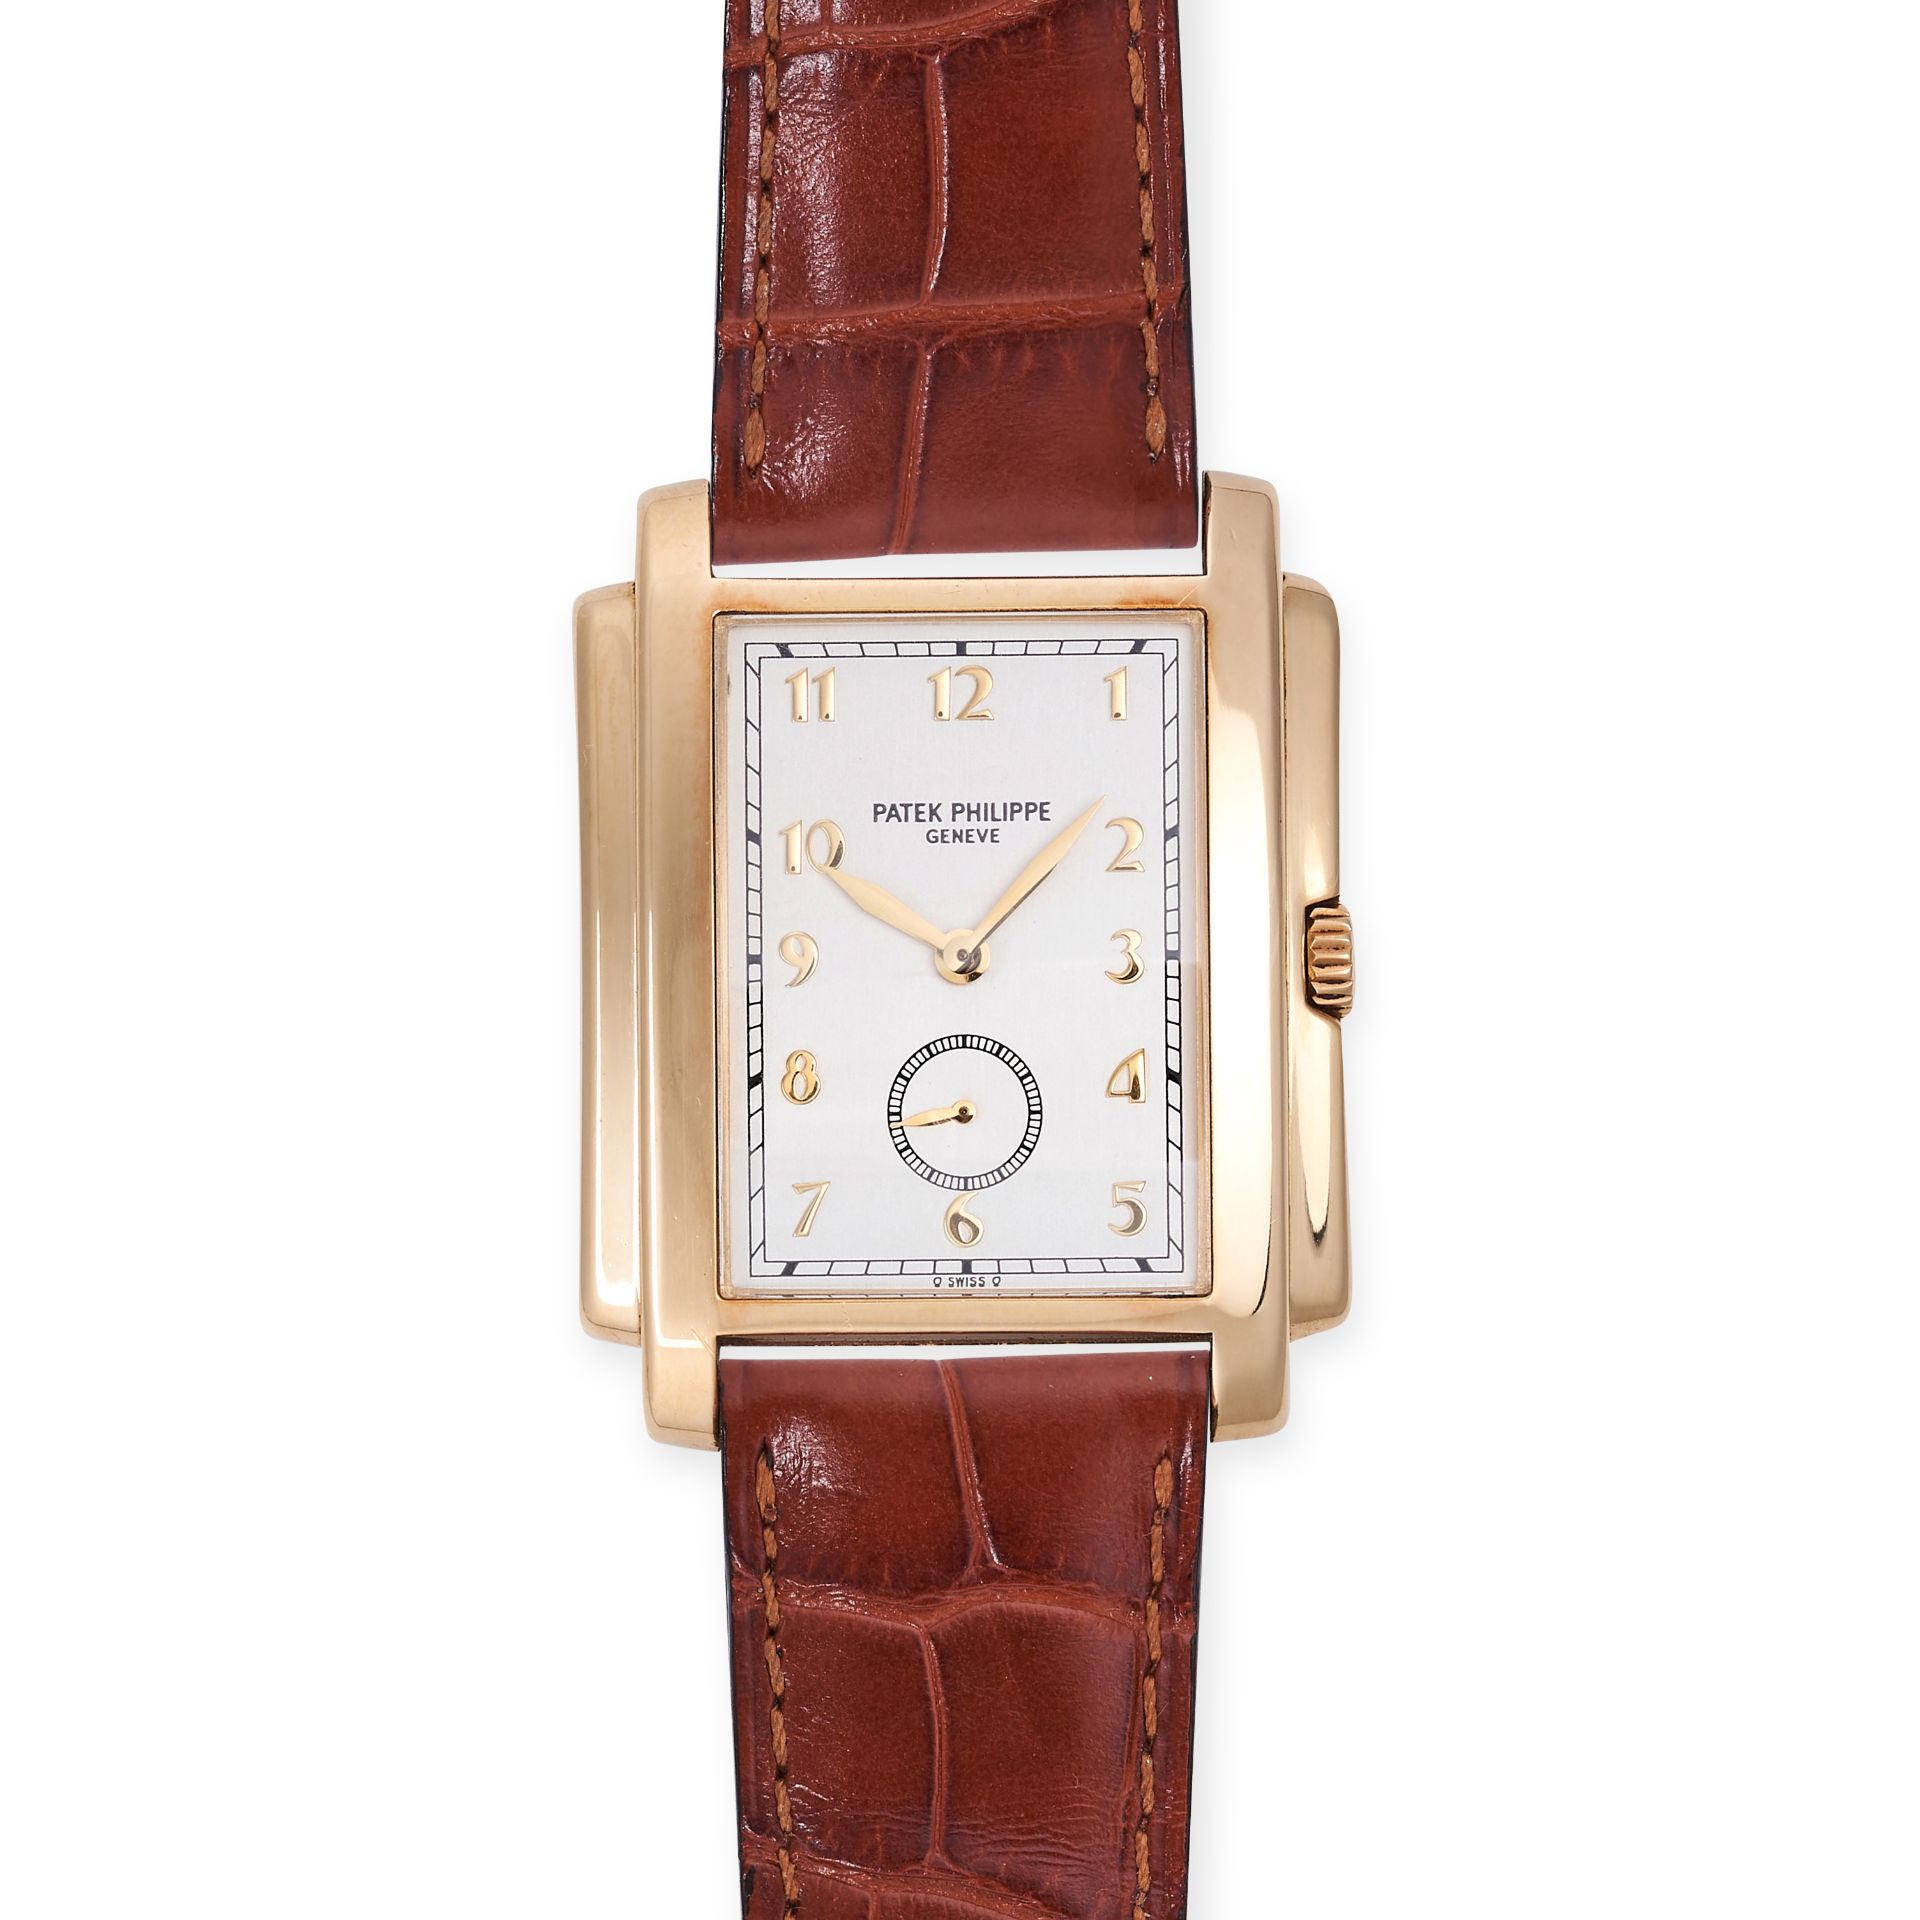 PATEK PHILIPPE - A PATEK PHILIPPE GONDOLO WRISTWATCH in 18ct yellow gold, 5024 J-010, c.1998, the... - Image 3 of 6